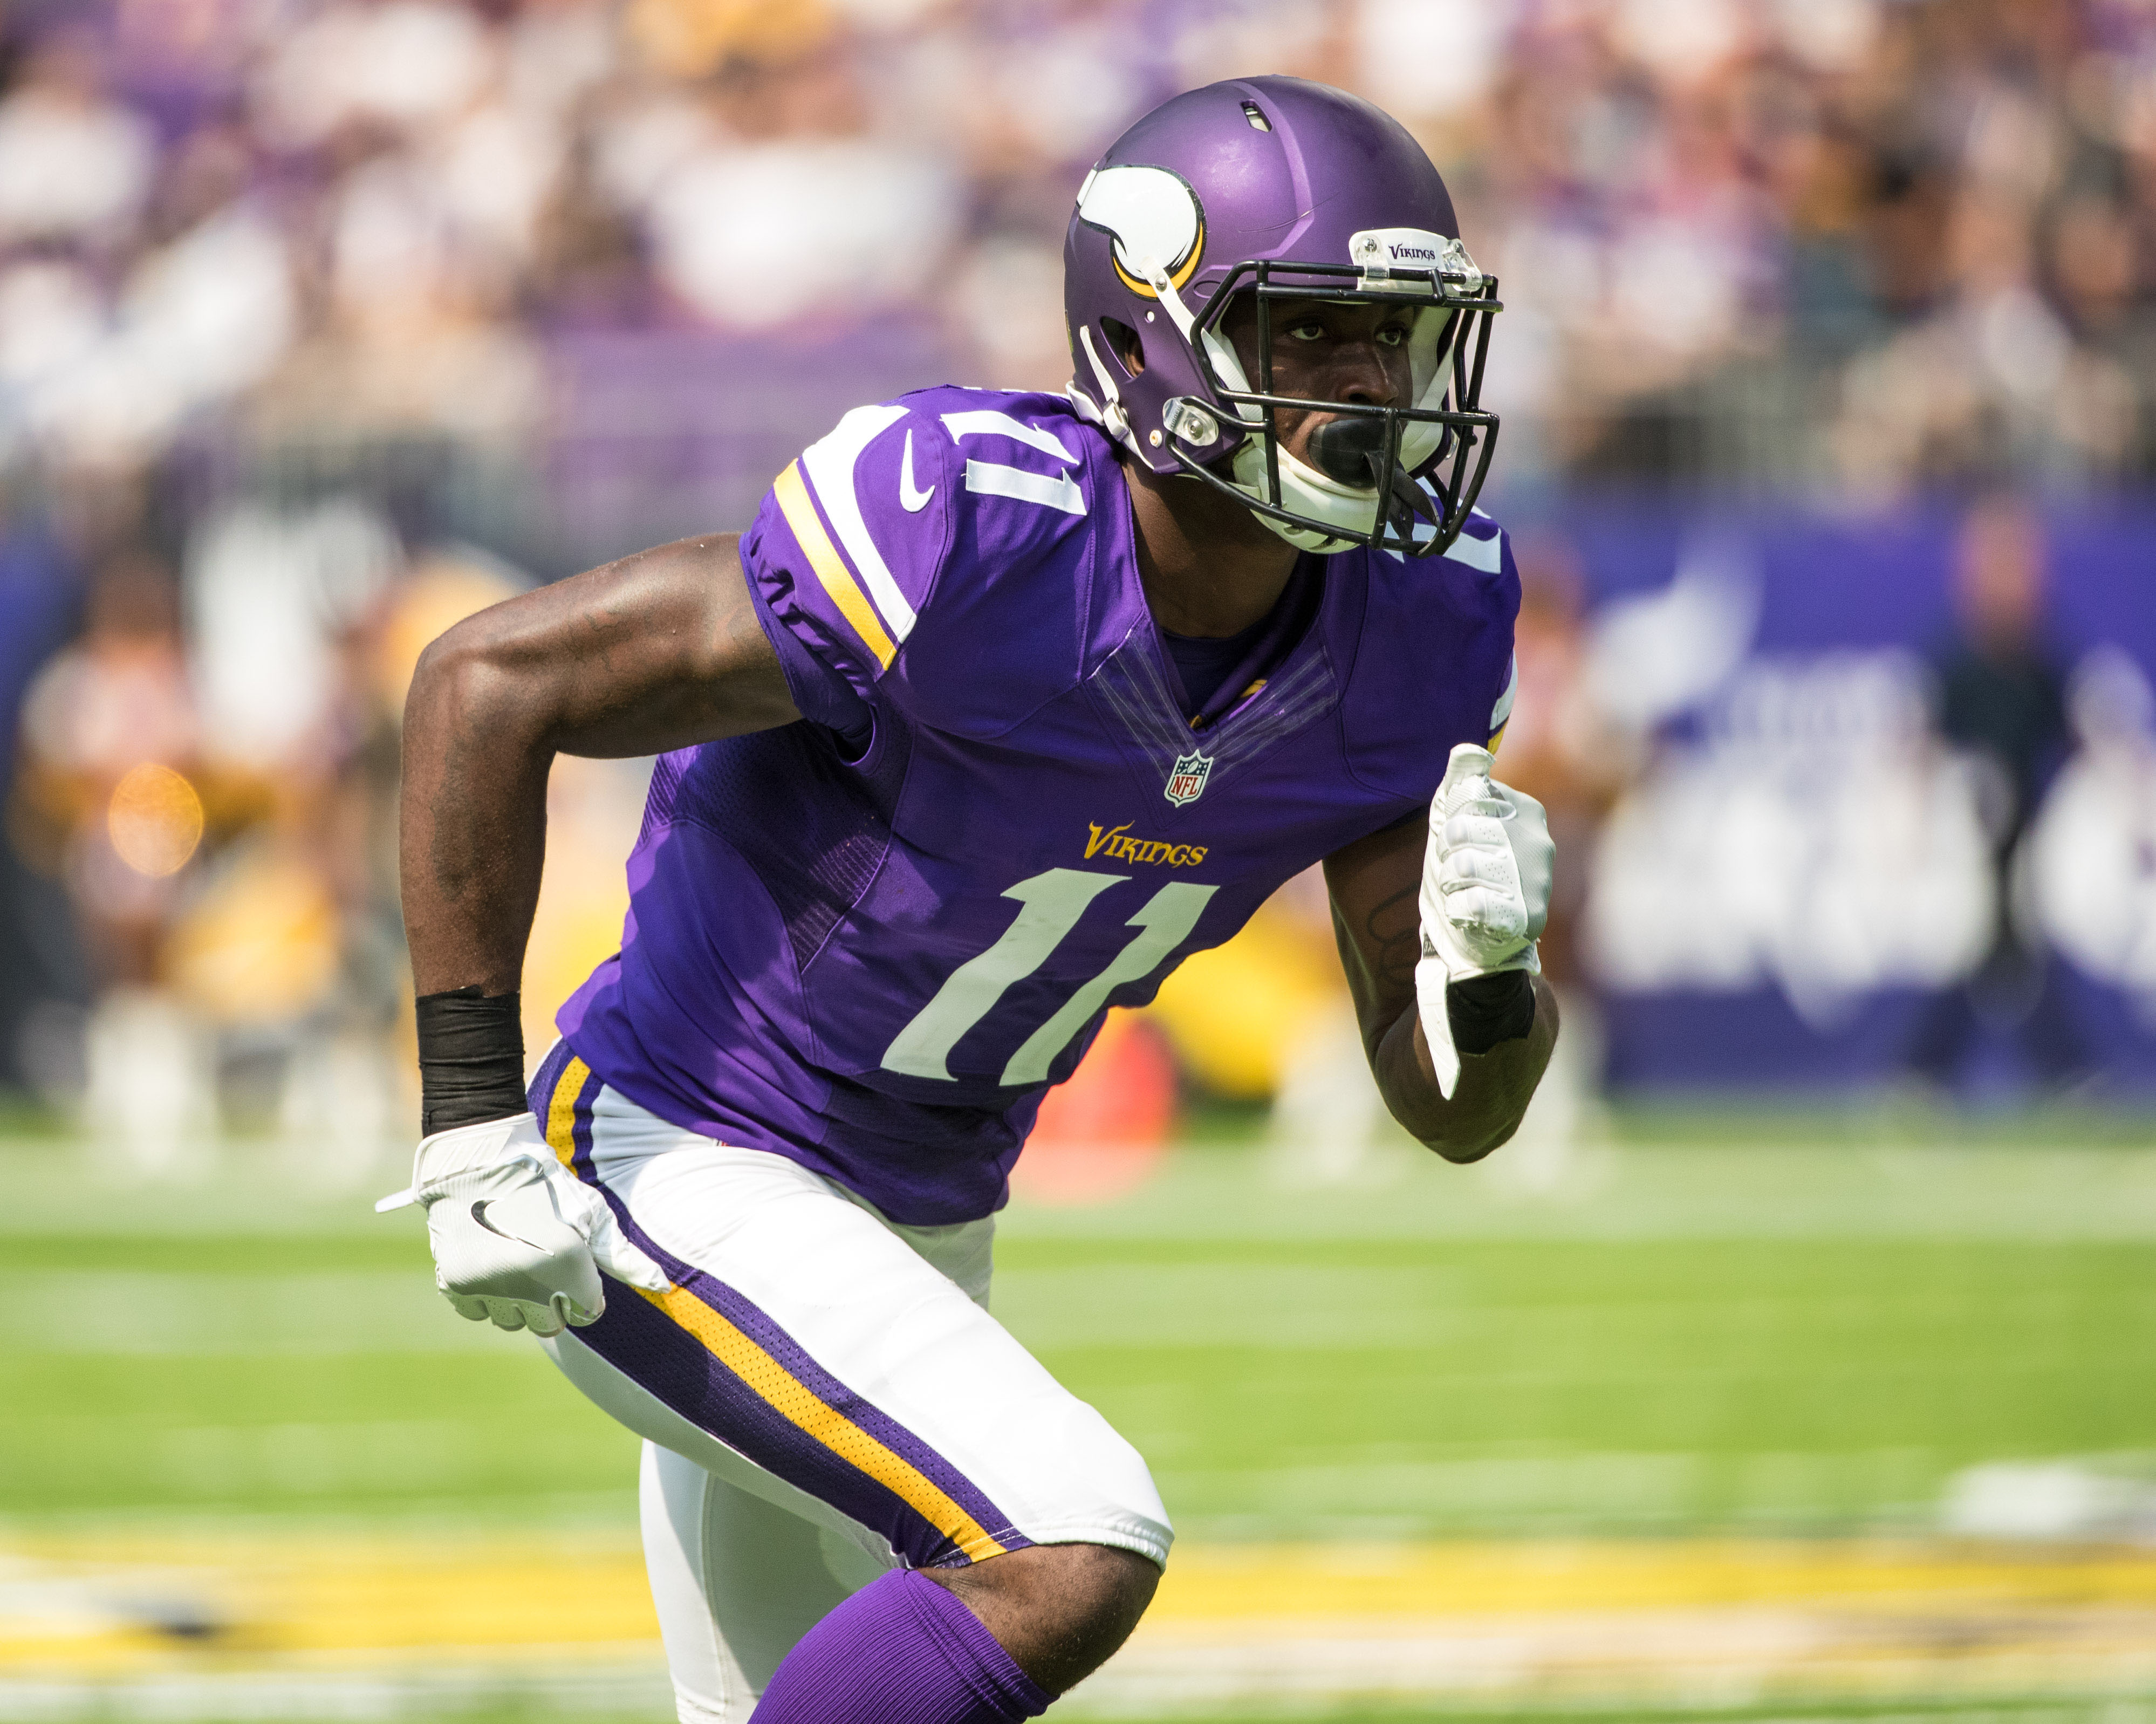 Aug 28, 2016; Minneapolis, MN, USA; Minnesota Vikings wide receiver Laquon Treadwell (11) runs during the fourth quarter in a preseason game against the San Diego Chargers at U.S. Bank Stadium. The Vikings won 23-10. Mandatory Credit: Brace Hemmelgarn-USA TODAY Sports